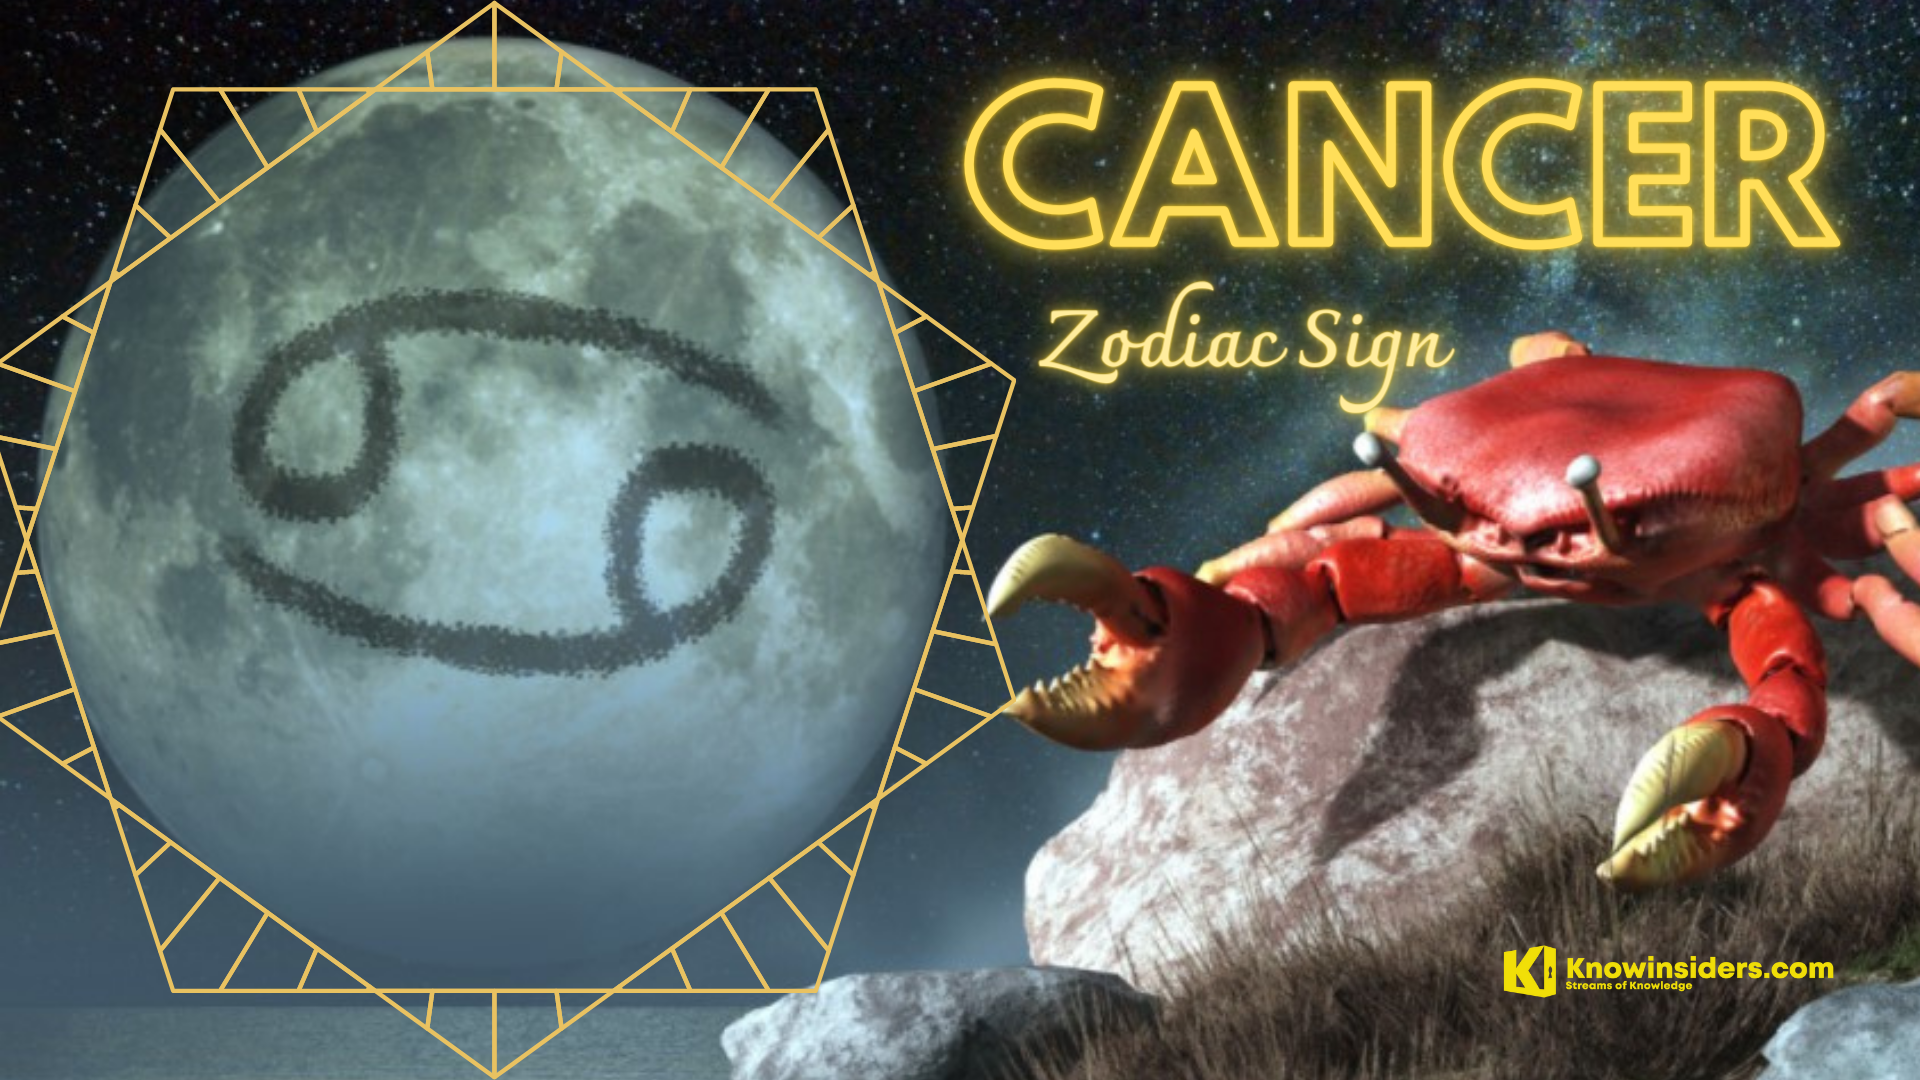 Top 5 Zodiac Signs That Make The Best Cuddlers